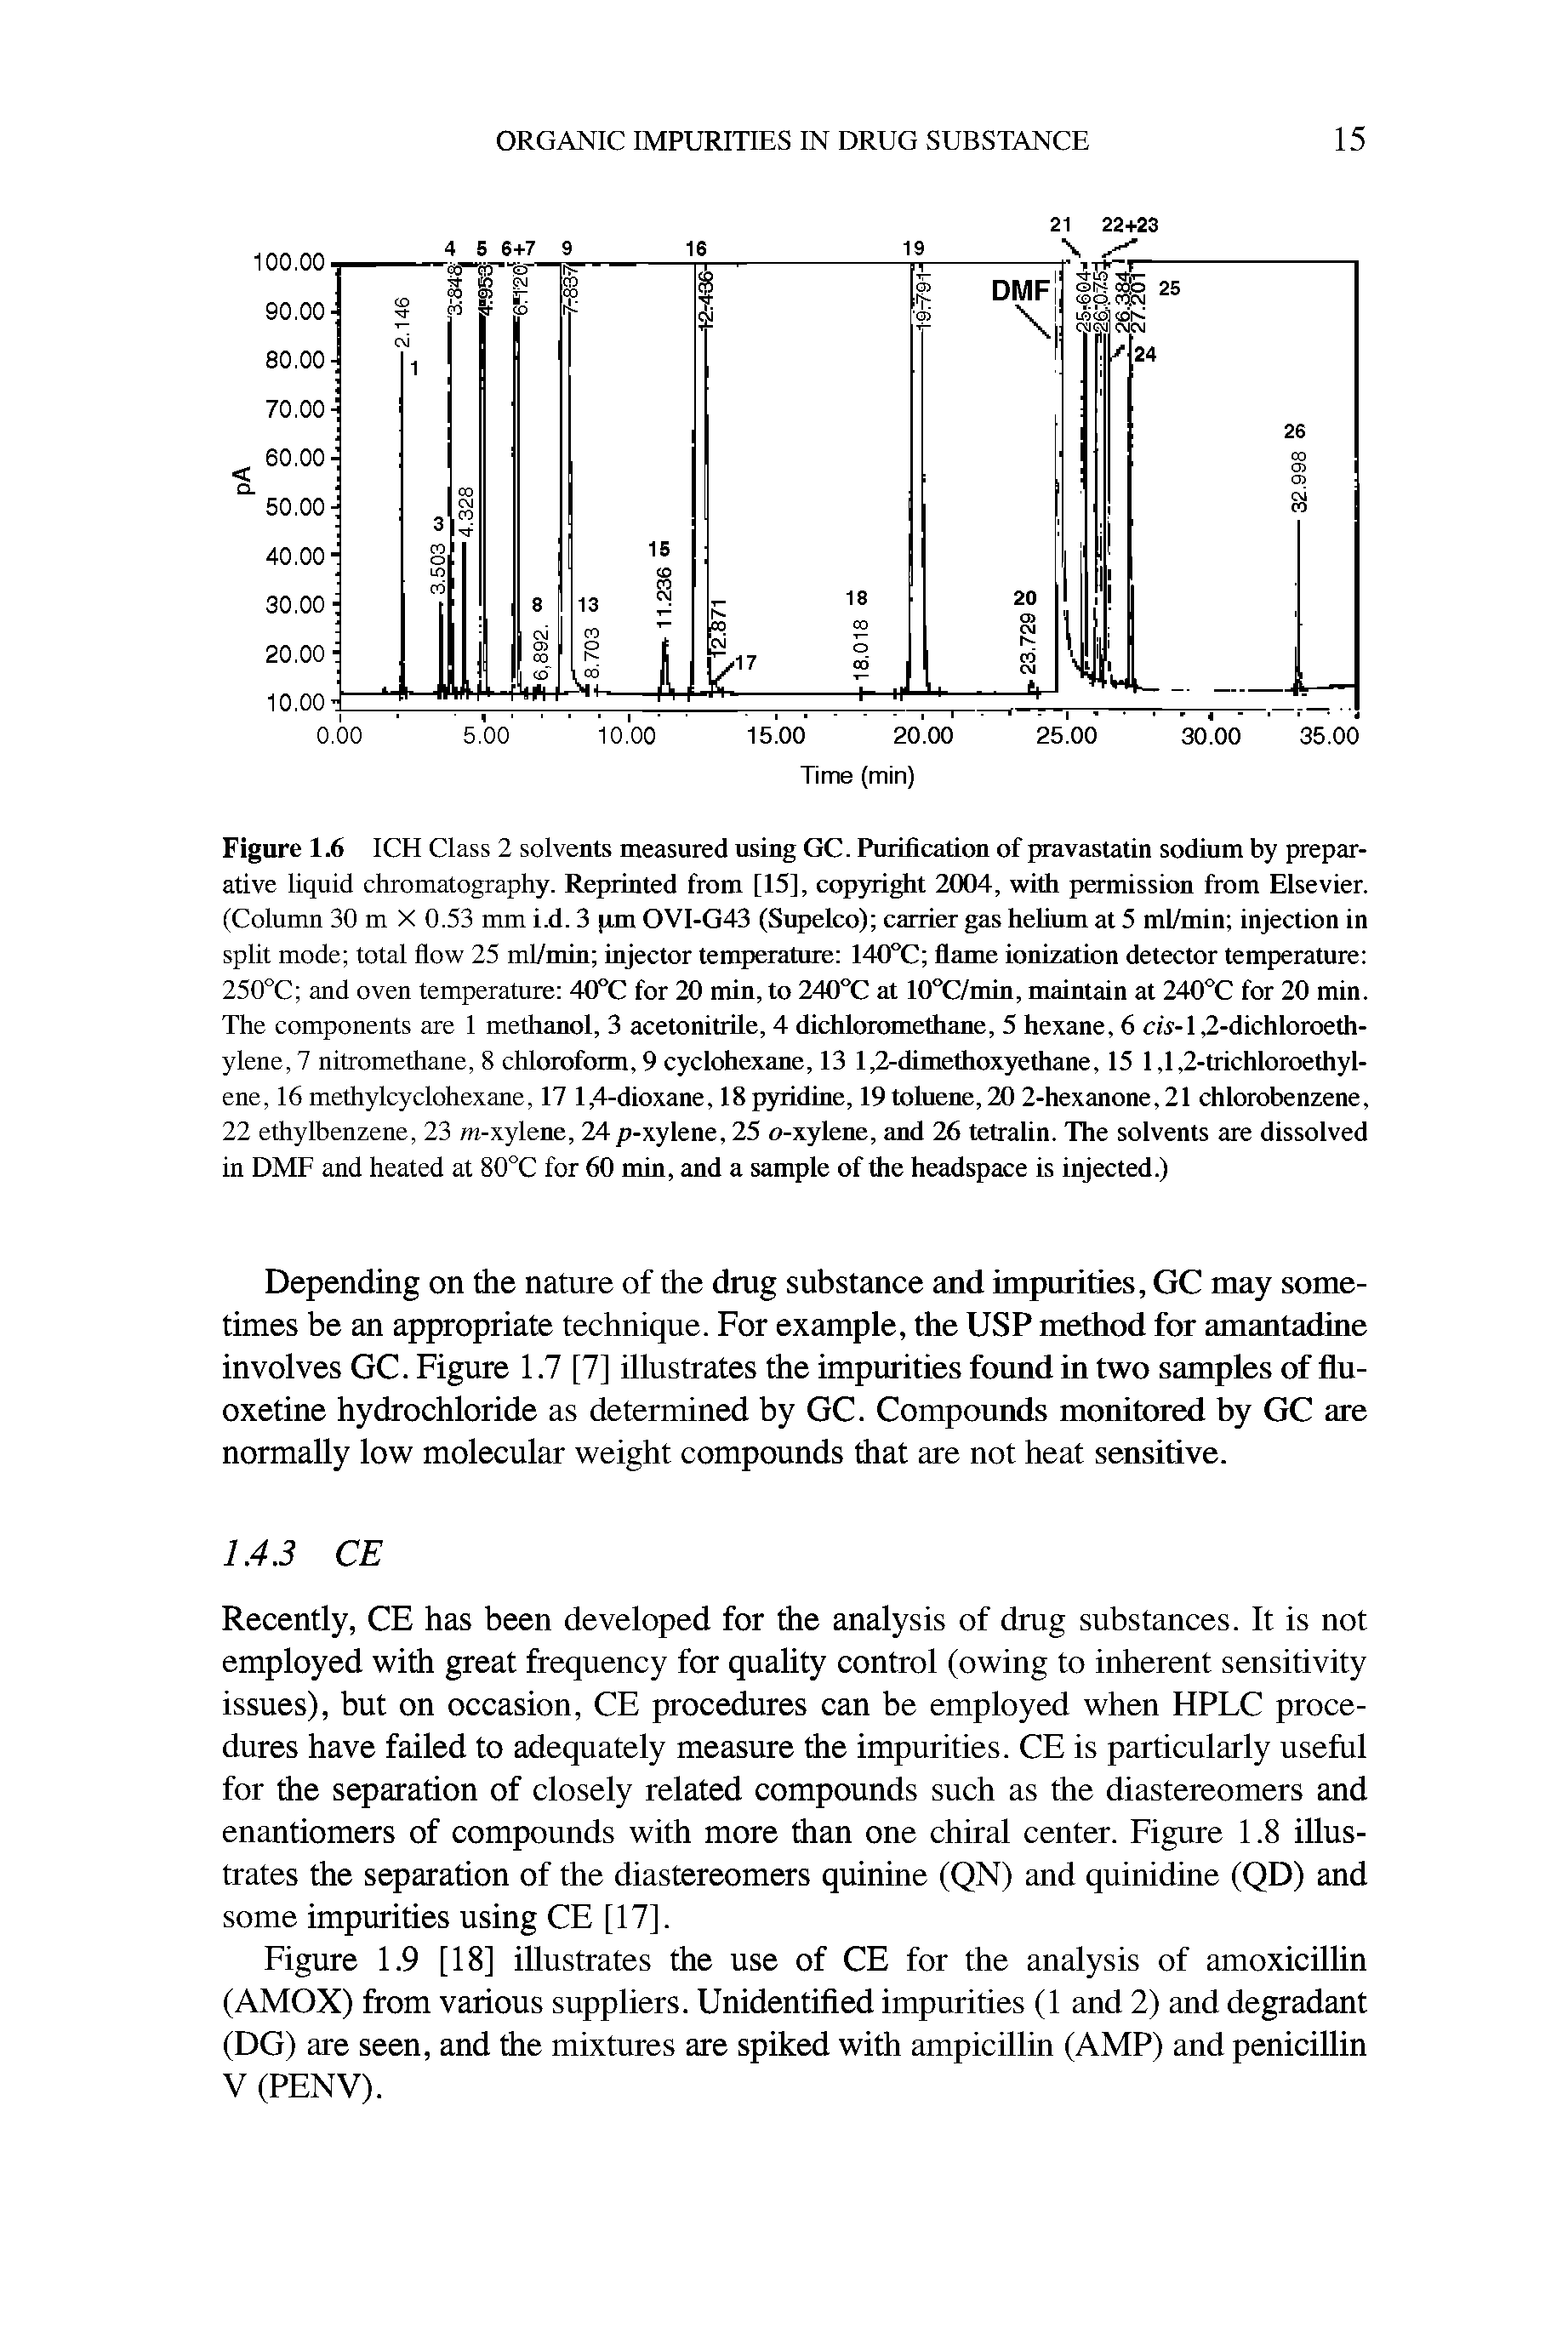 Figure 1.6 ICH Class 2 solvents measured using GC. Purification of pravastatin sodium by preparative liquid chromatography. Reprinted from [15], copyright 2004, with permission from Elsevier. (Column 30 m X 0.53 mm i.d. 3 pm OVI-G43 (Supelco) carrier gas helium at 5 ml/min injection in split mode total flow 25 ml/min injector temperature 140 C flame ionization detector temperature 25C C and oven temperature 40°C for 20 min, to 240°C at 10°C/min, maintain at 240 C for 20 min. The components are 1 methanol, 3 acetonitrile, 4 dichloromethane, 5 hexane, 6 cw-l,2-dichloroeth-ylene, 7 nitromethane, 8 chloroform, 9 cyclohexane, 13 1,2-dimethoxyethane, 15 1,1,2-trichloroethyl-ene, 16 methylcyclohexane, 17 1,4-dioxane, 18 pyridine, 19 toluene, 20 2-hexanone, 21 chlorobenzene, 22 ethylbenzene, 23 m-xylene, 24p-xylene, 25 o-xylene, and 26 tetralin. The solvents are dissolved in DMF and heated at 80X for 60 min, and a sample of the headspace is injected.)...